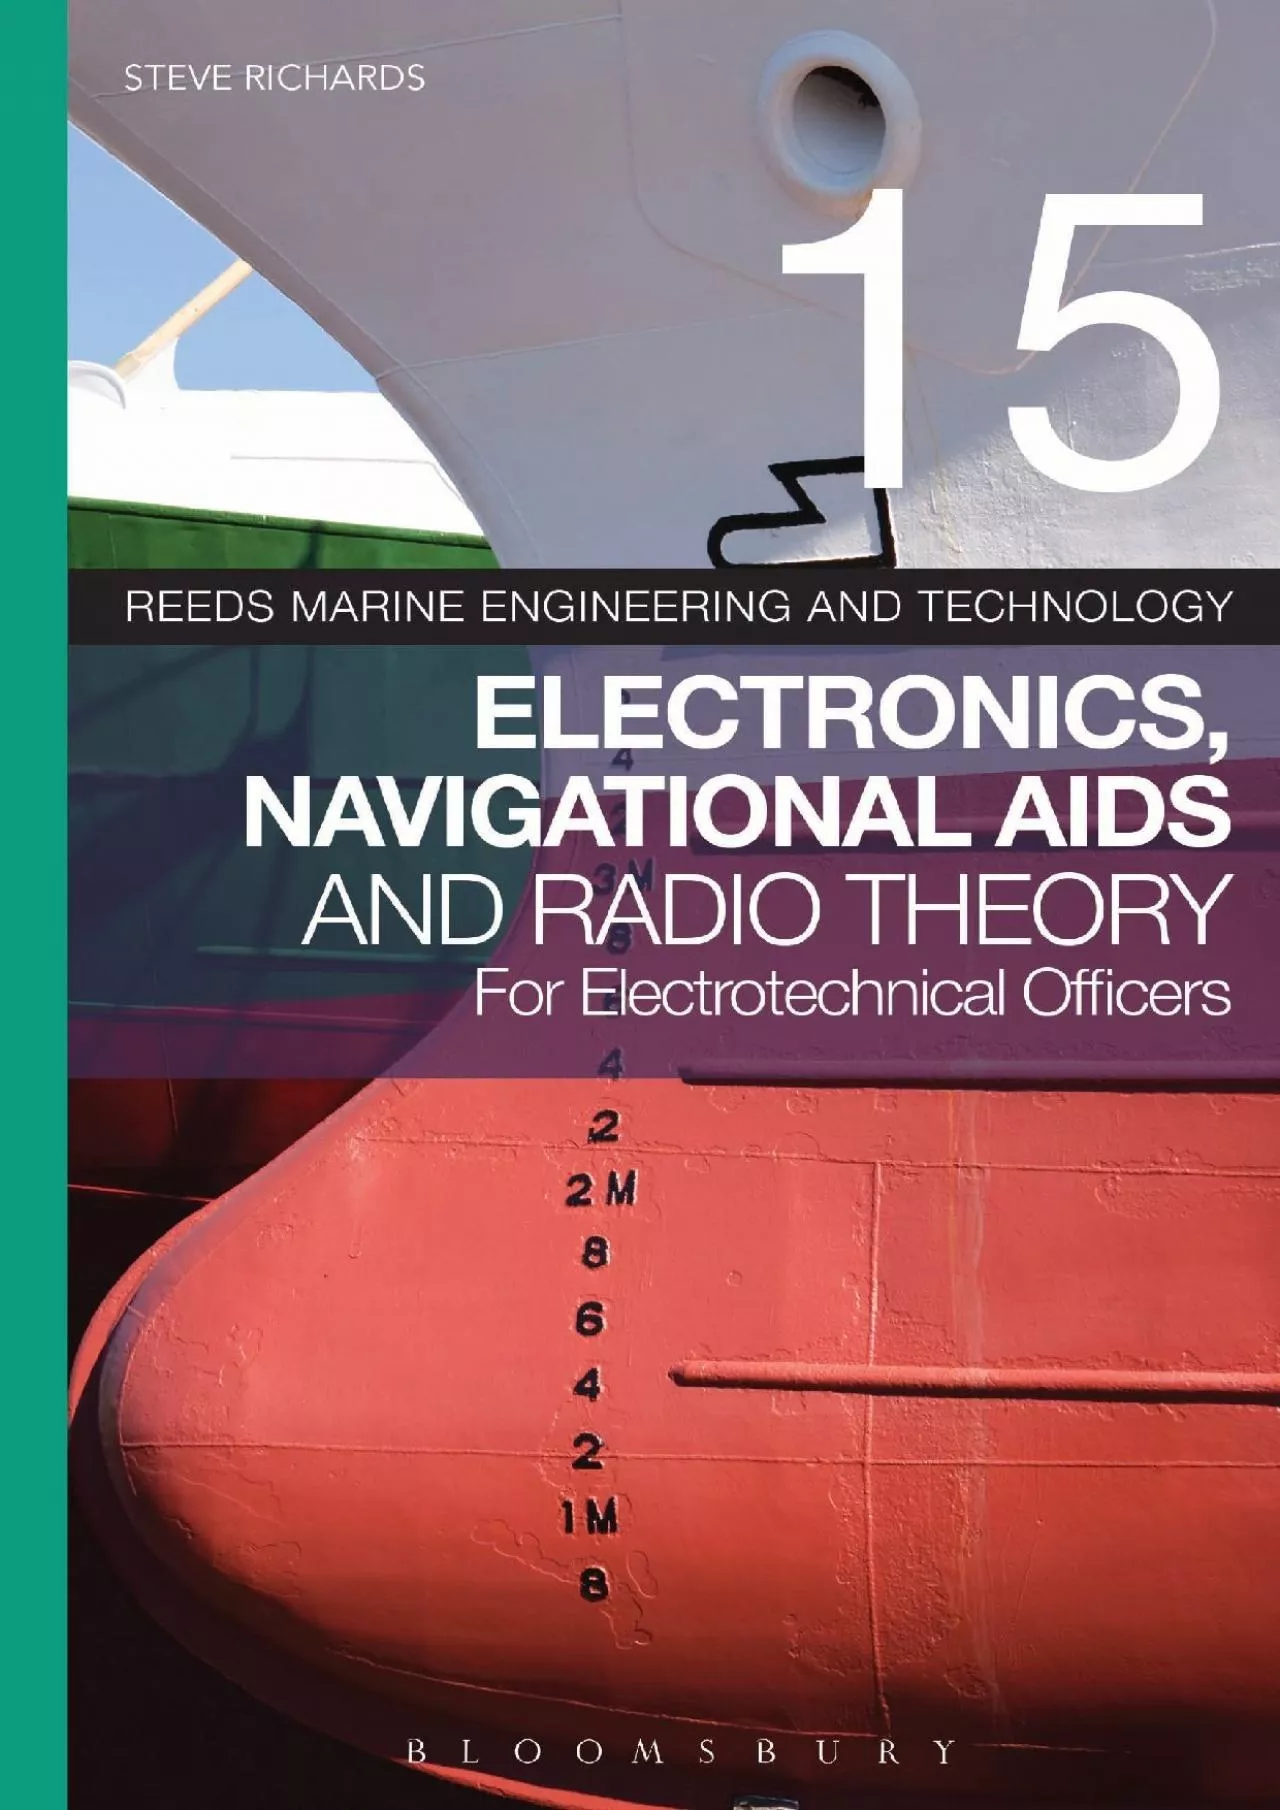 [DOWNLOAD] Reeds Vol 15: Electronics, Navigational Aids and Radio Theory for Electrotechnical